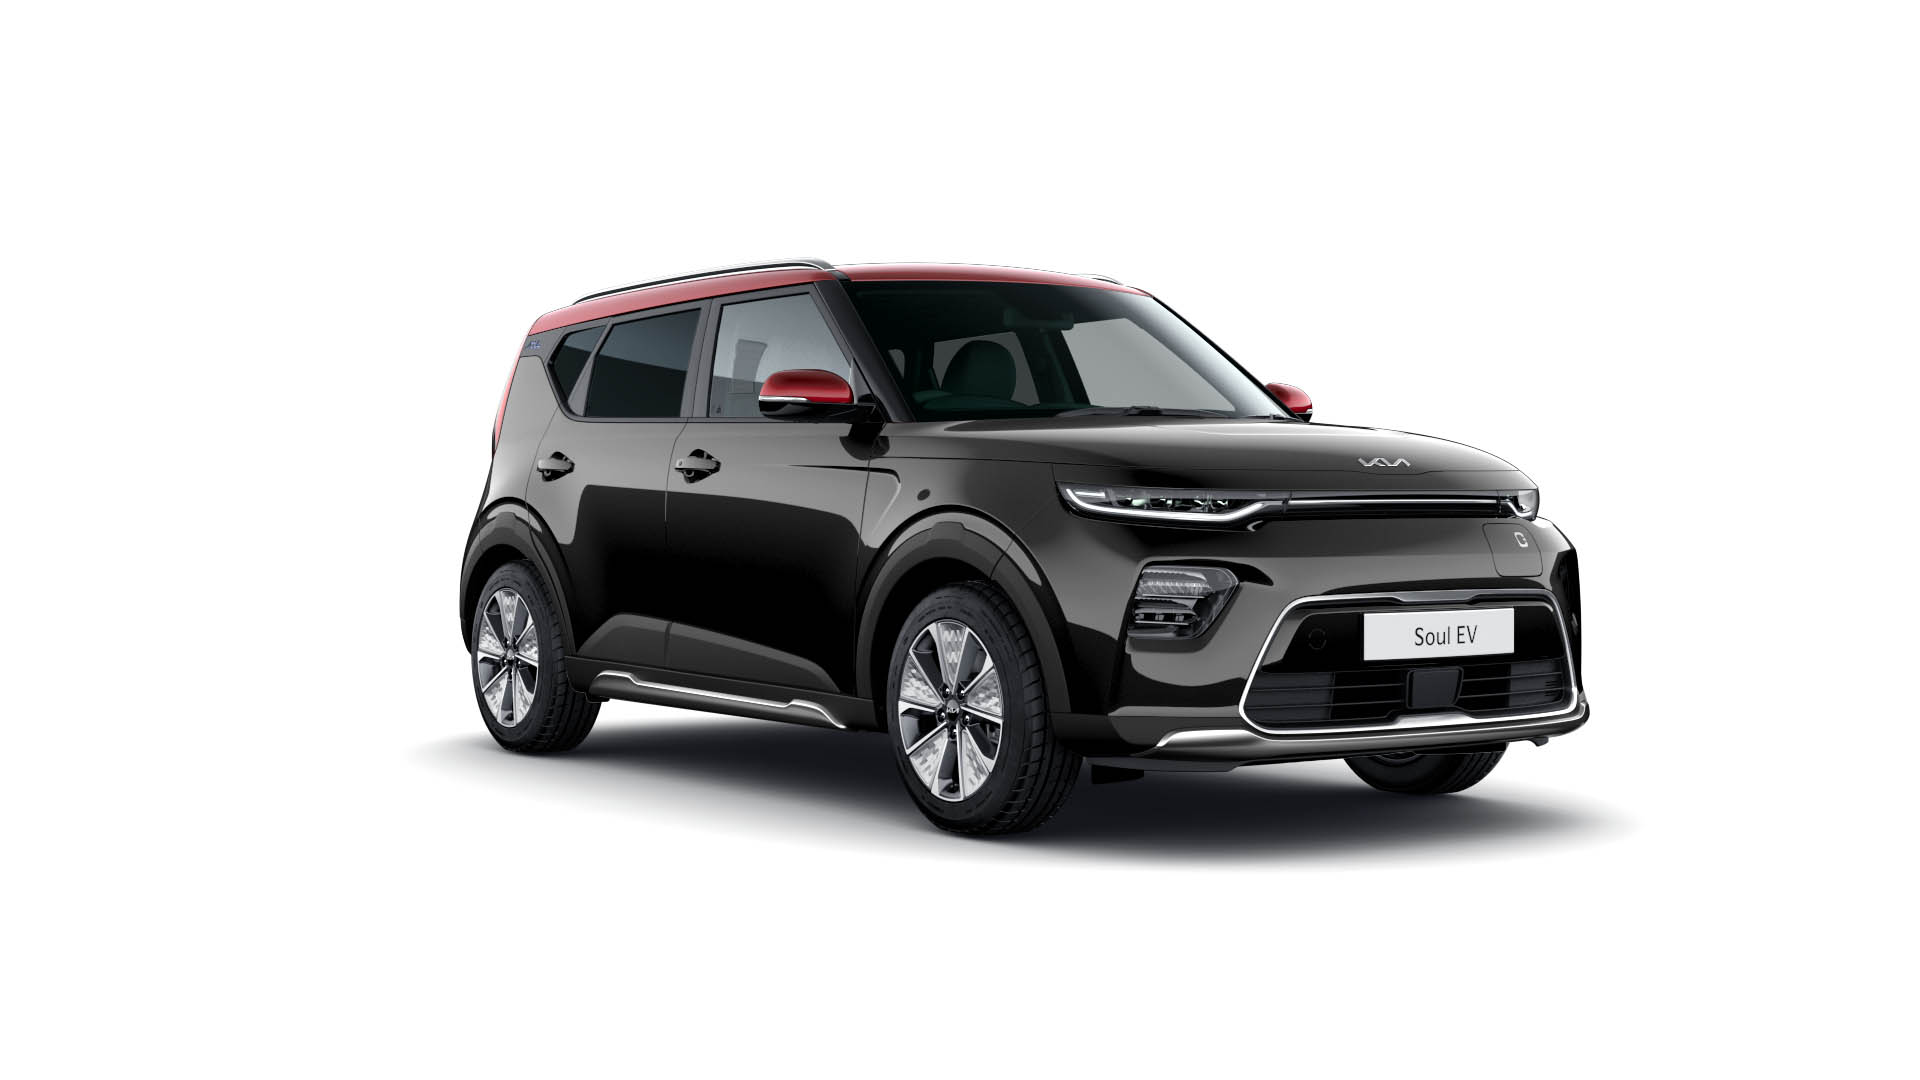 Kia Soul EV Maxx available from £34,945 on-the-road